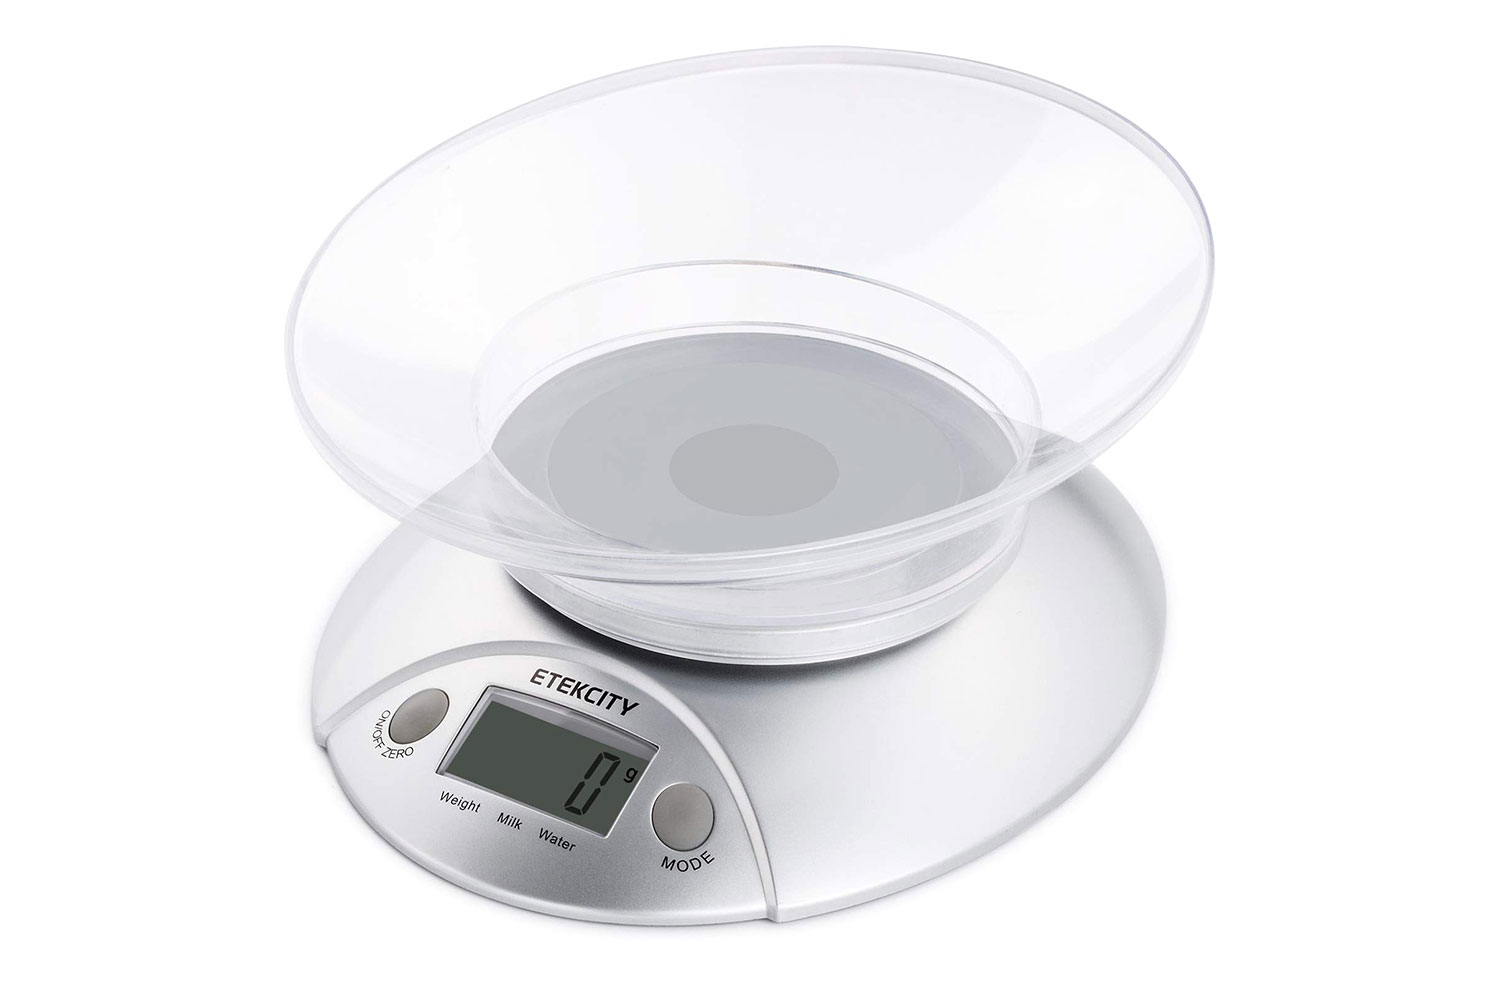 Etekcity Digital Kitchen Scale Multifunction Food Scale with Removable Bowl